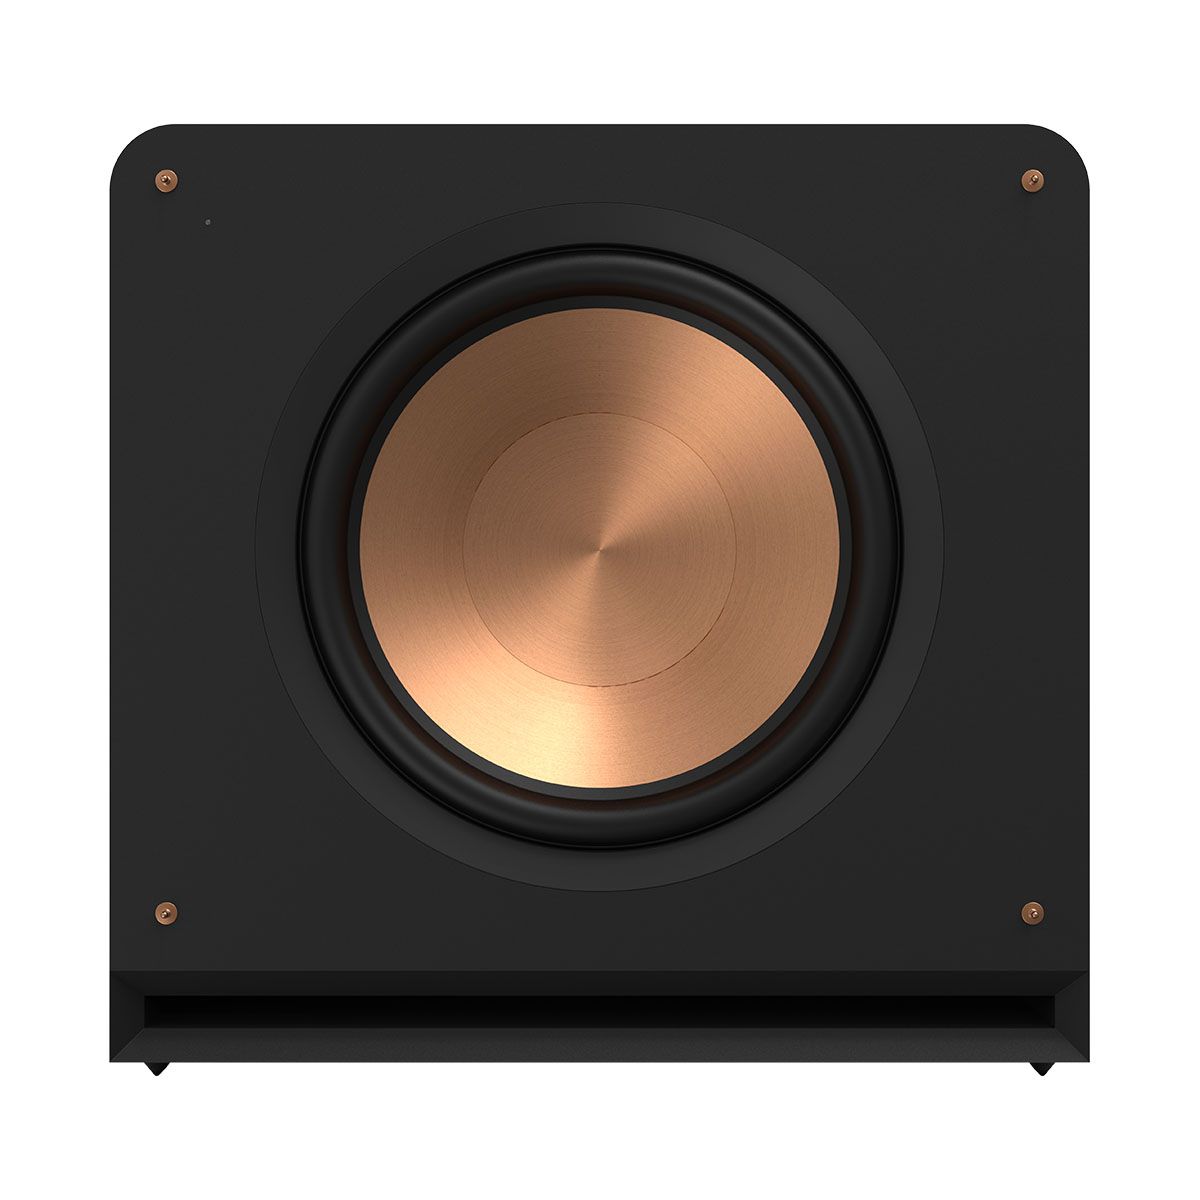 Klipsch RP-1600SW 16" Powered Subwoofer - Ebony - front view without grille